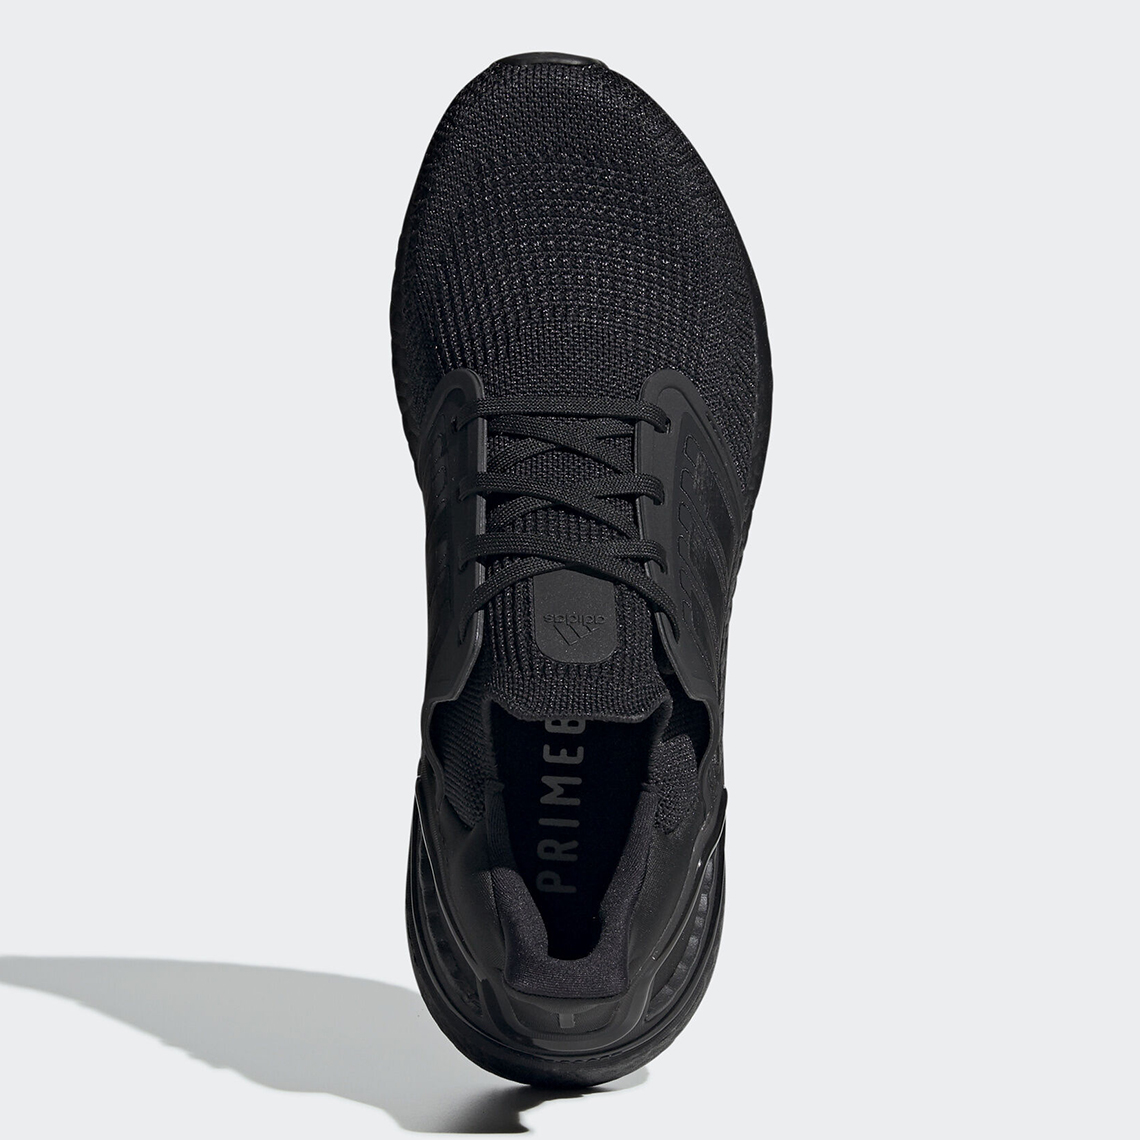 Adidas UltraBoost 20 Revealed In Triple-Black Colorway: Official Photos